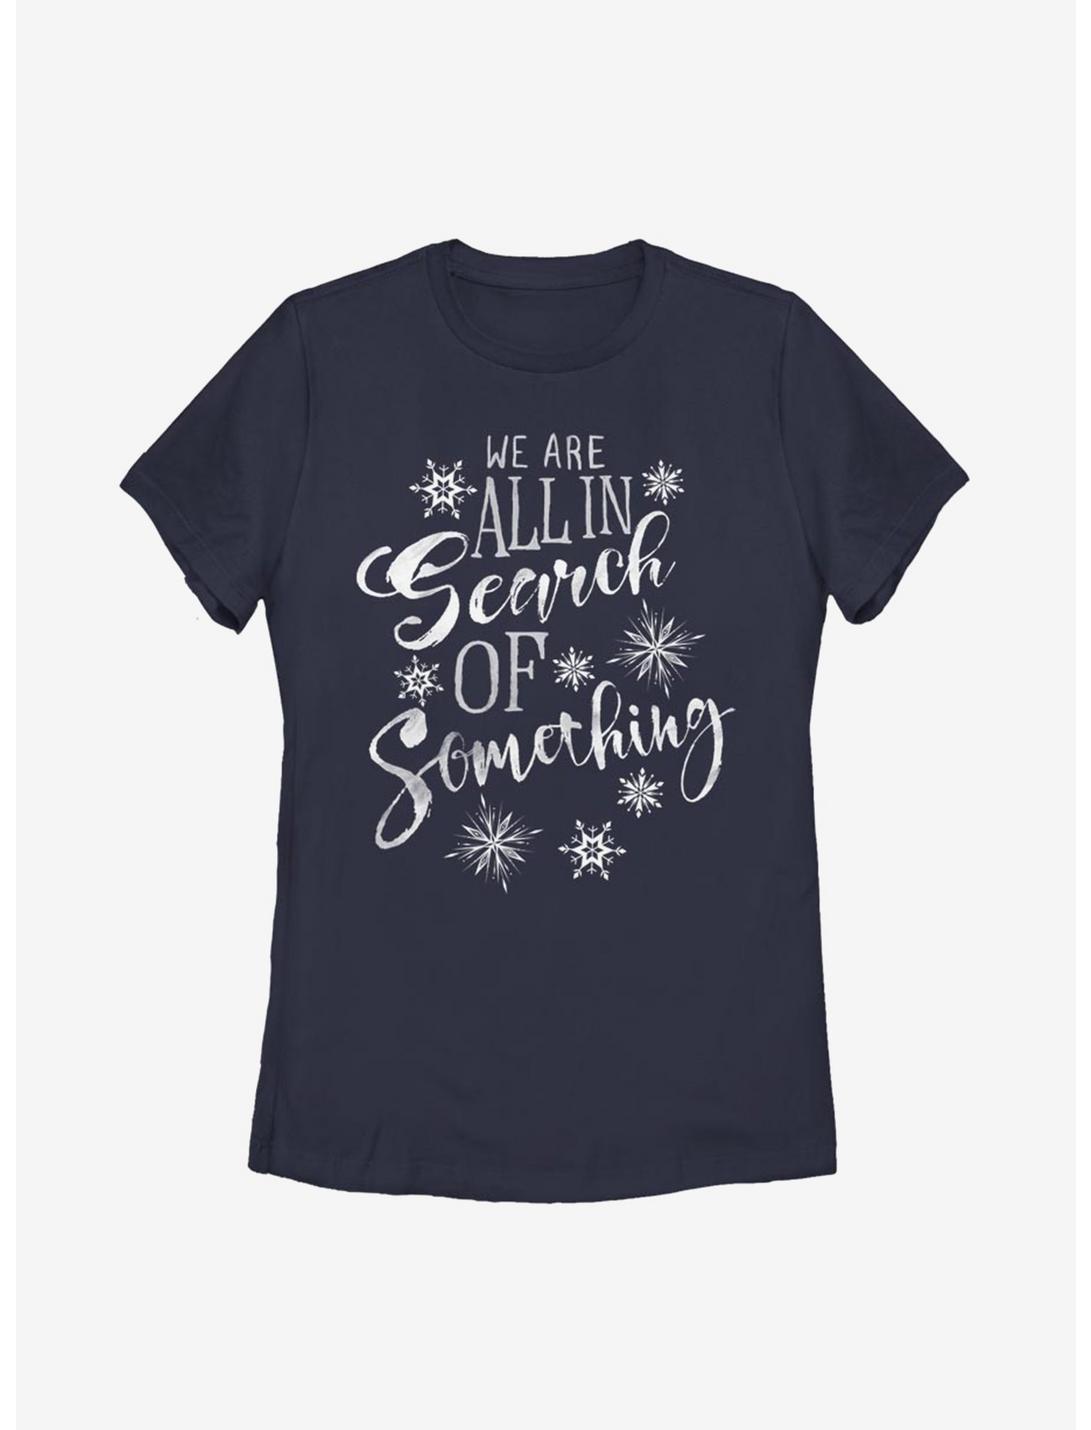 Disney Frozen 2 In Search Of Something Womens T-Shirt, NAVY, hi-res